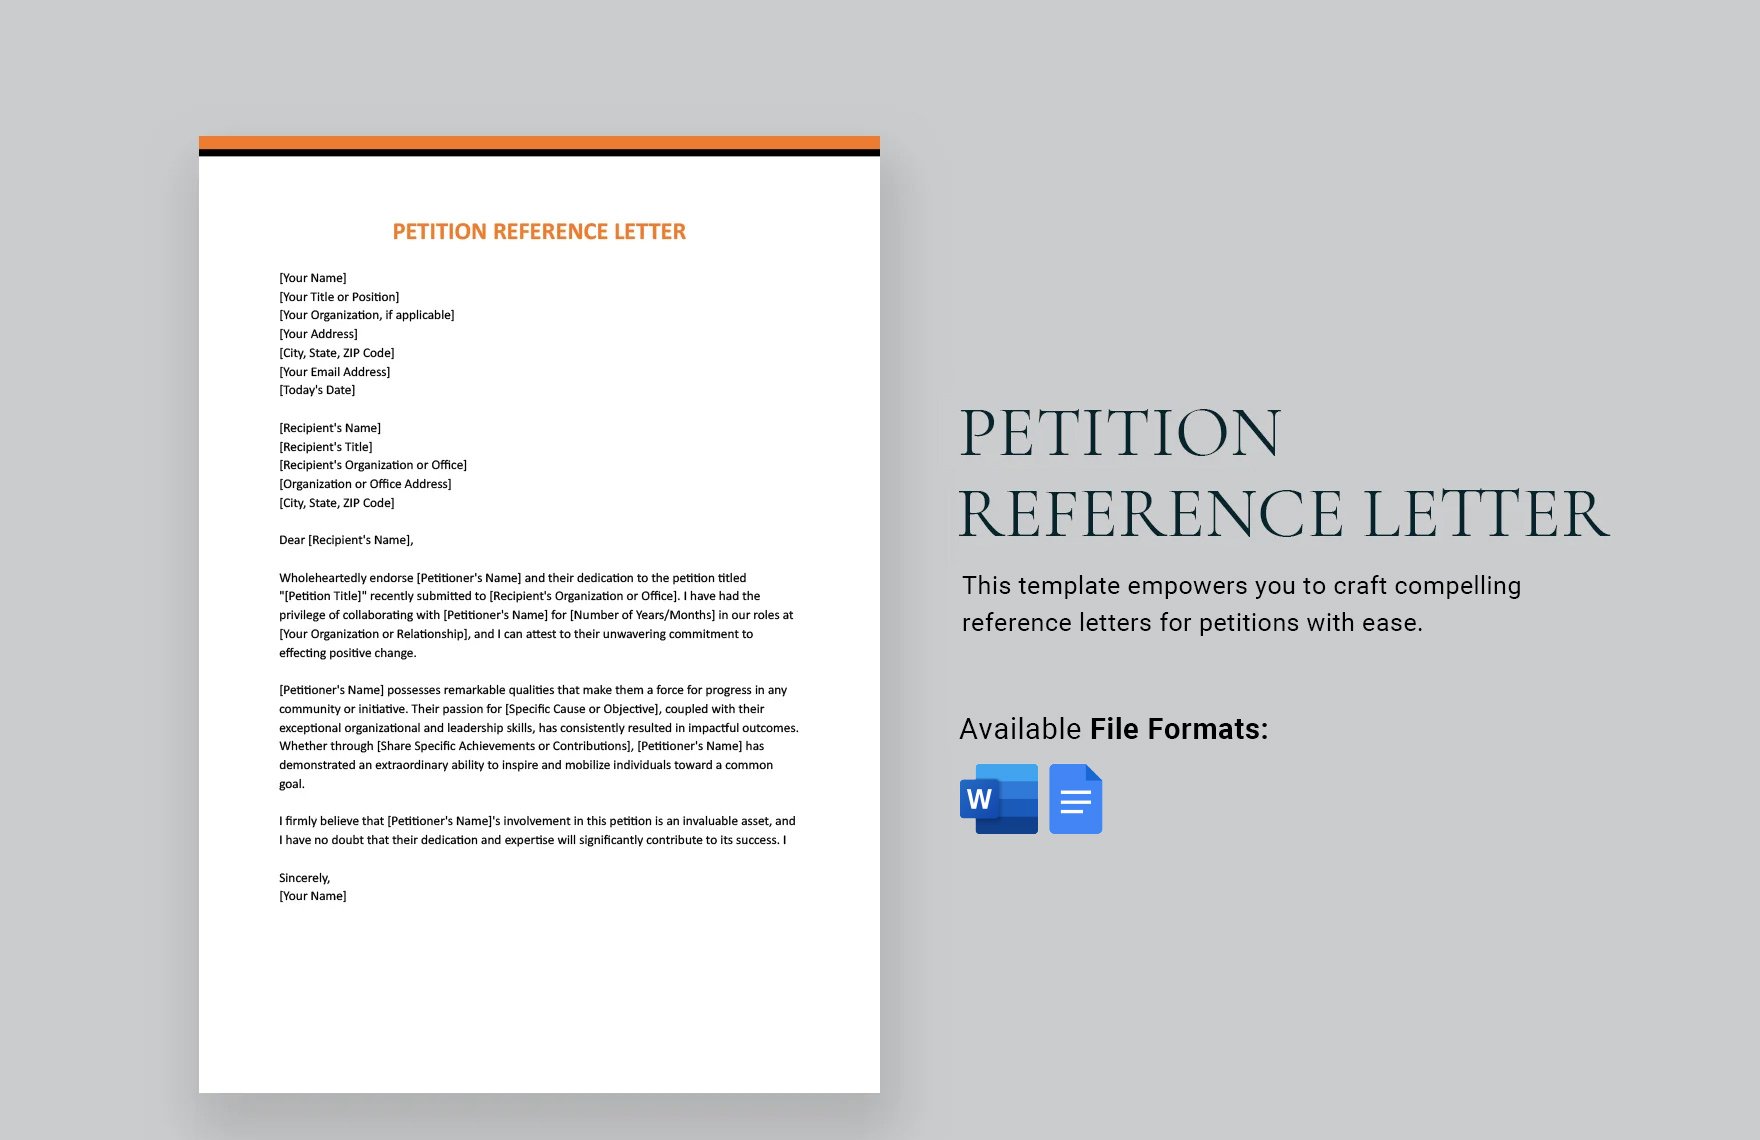 Petition Reference Letter in Word, Google Docs